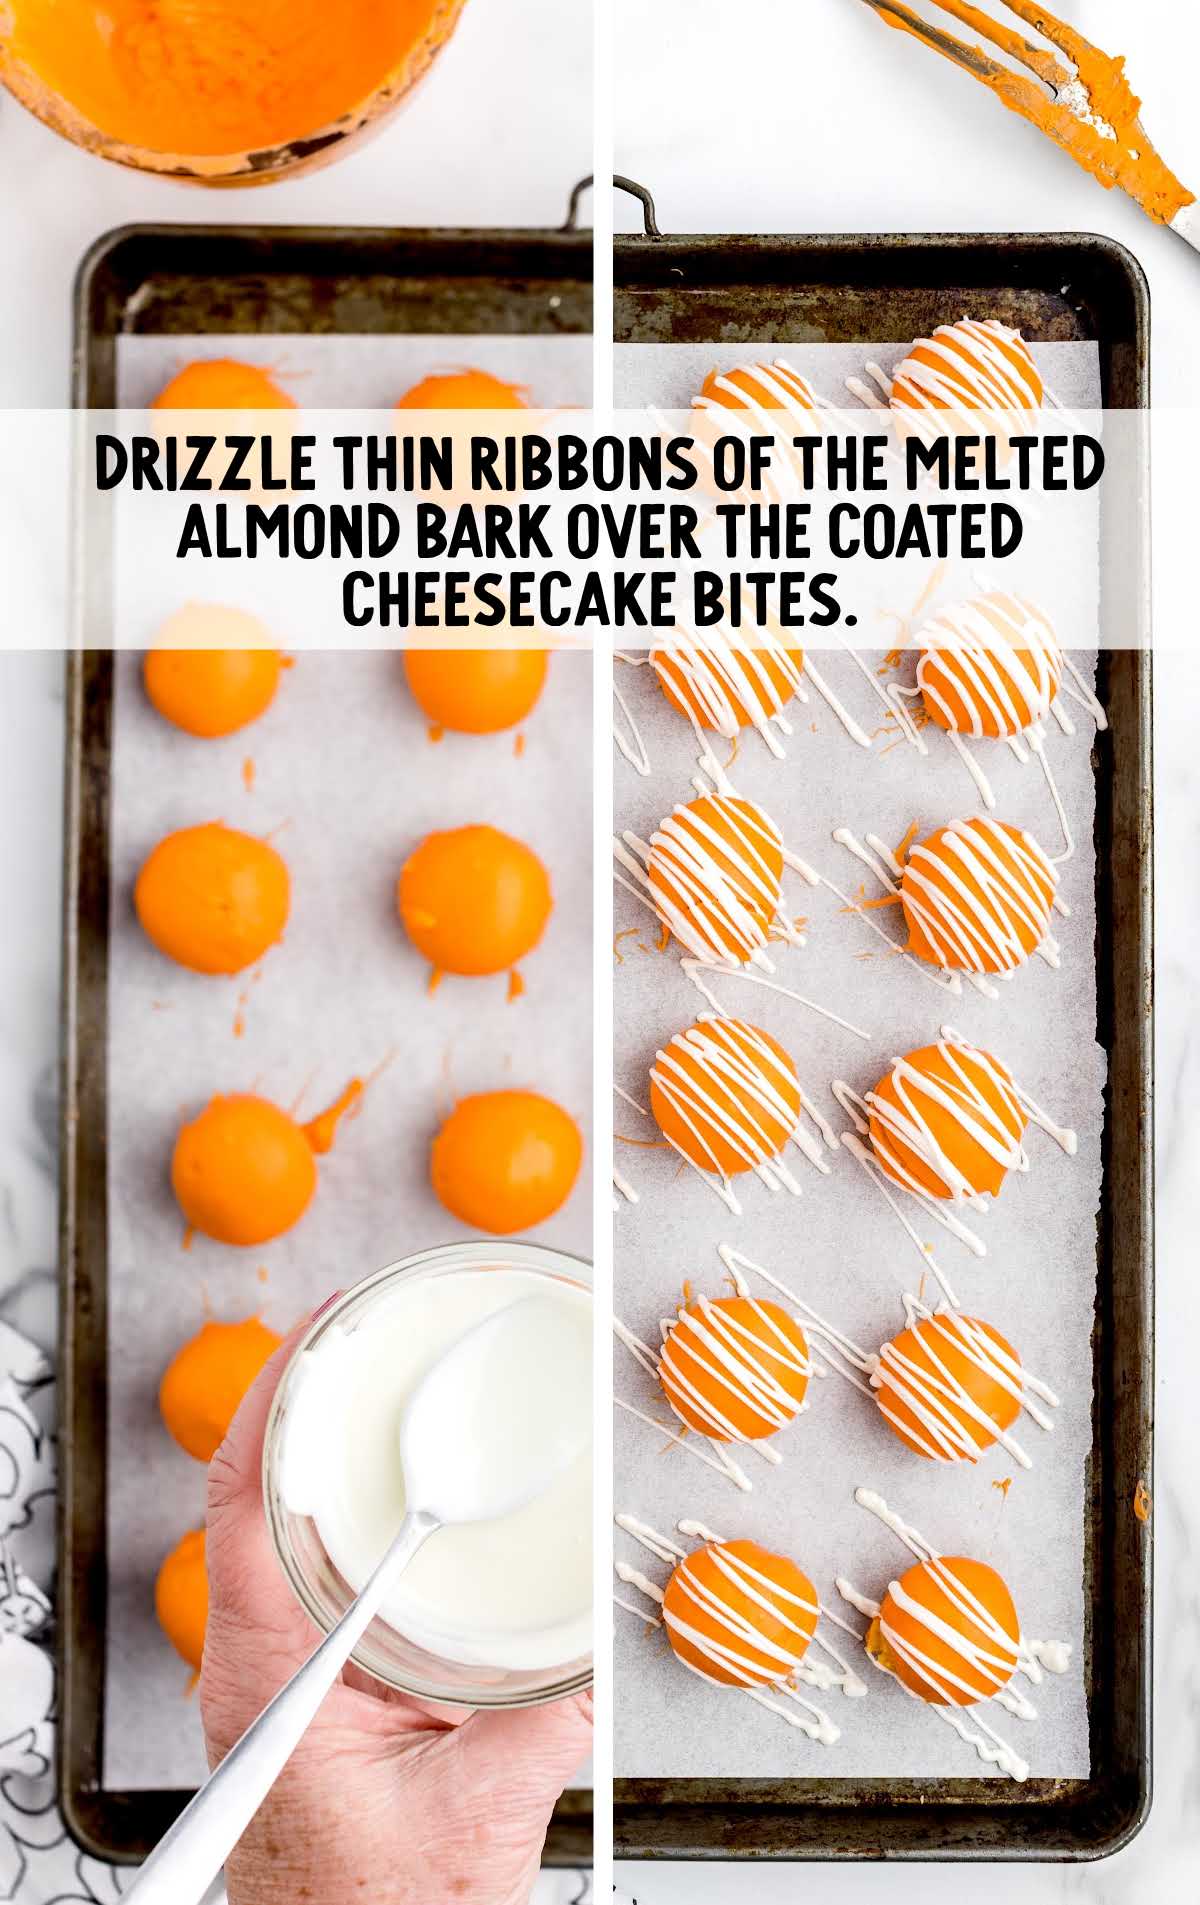 melted almond bark drizzled over the coated cheesecake bites on a baking sheet